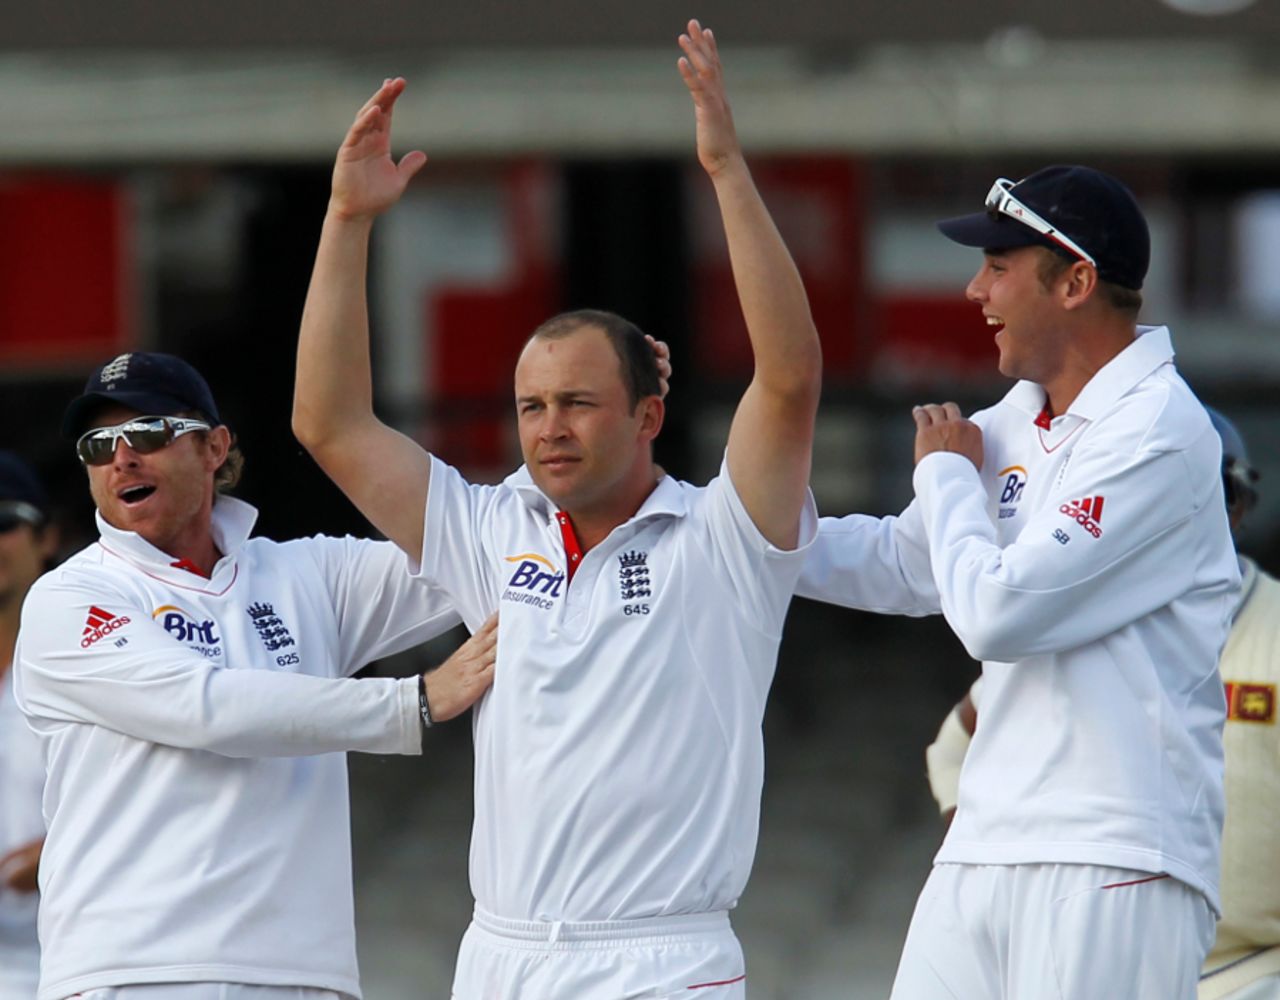 Jonathan Trott celebrates a wicket at Lord's, England v Sri Lanka, 2nd Test, Lord's, 5th day, June 7, 2011